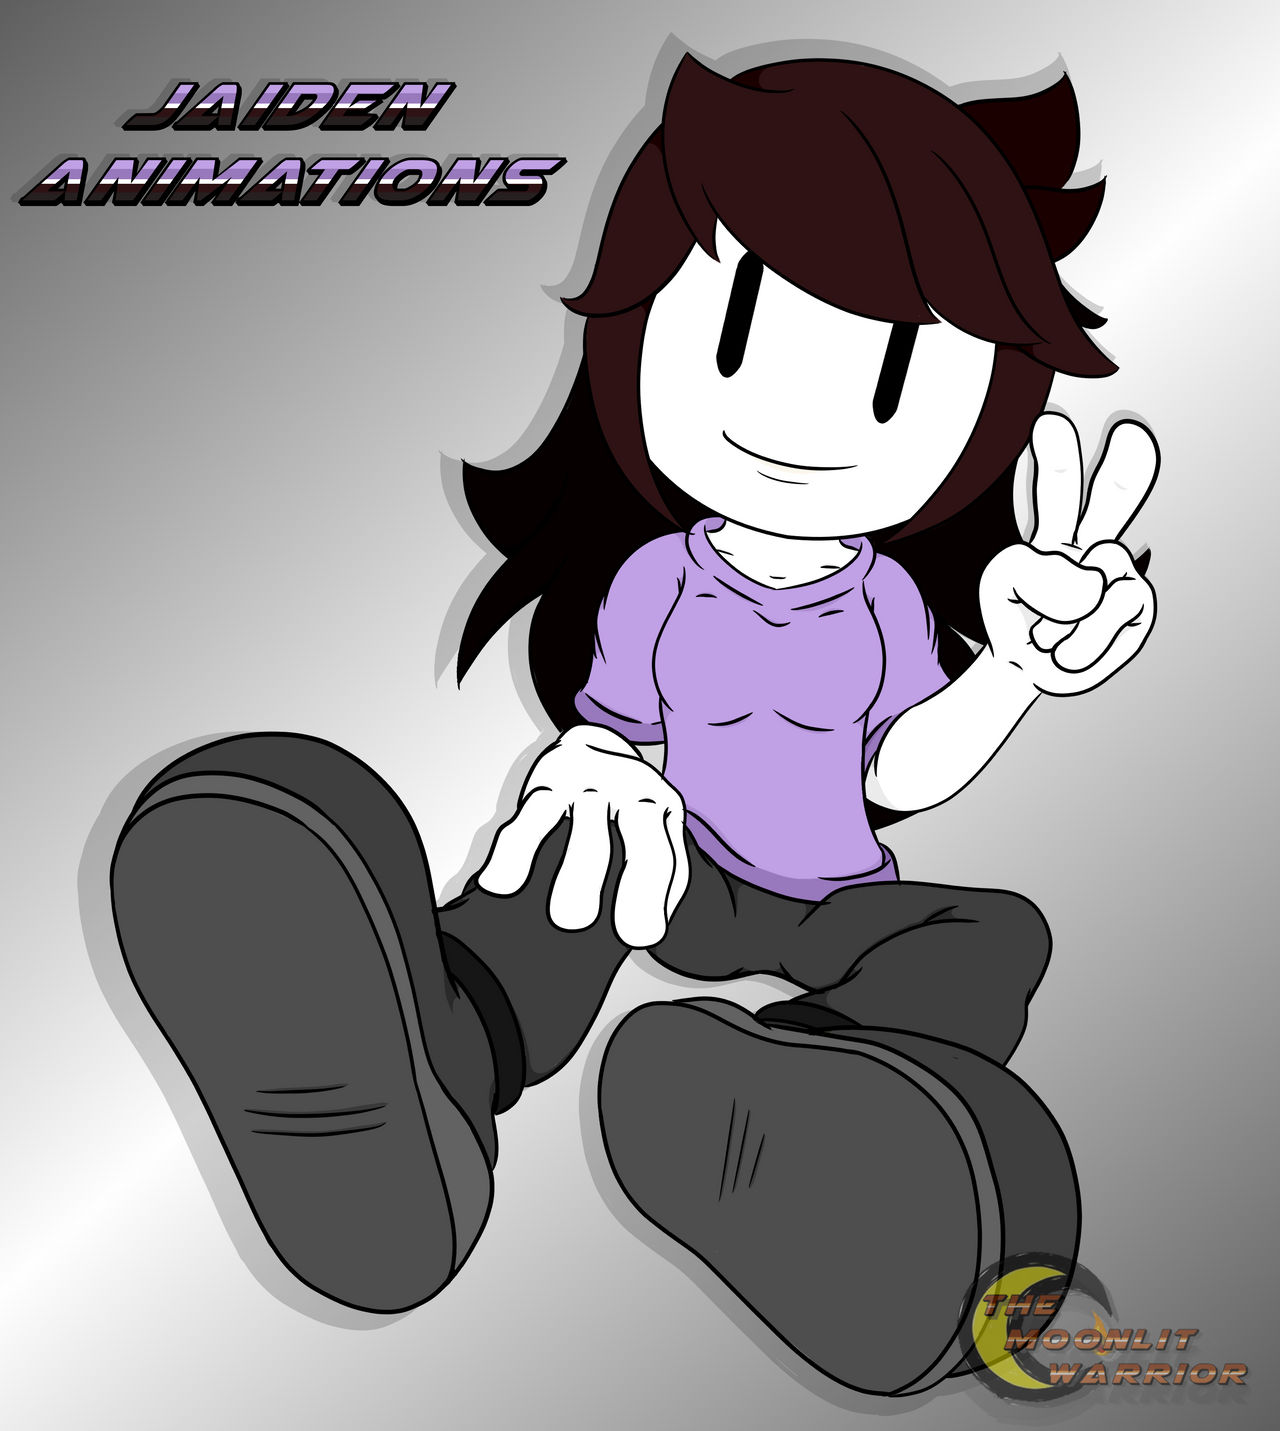 Pin by Chloe on Bug  Jaiden animations, Animated drawings, Warrior cat